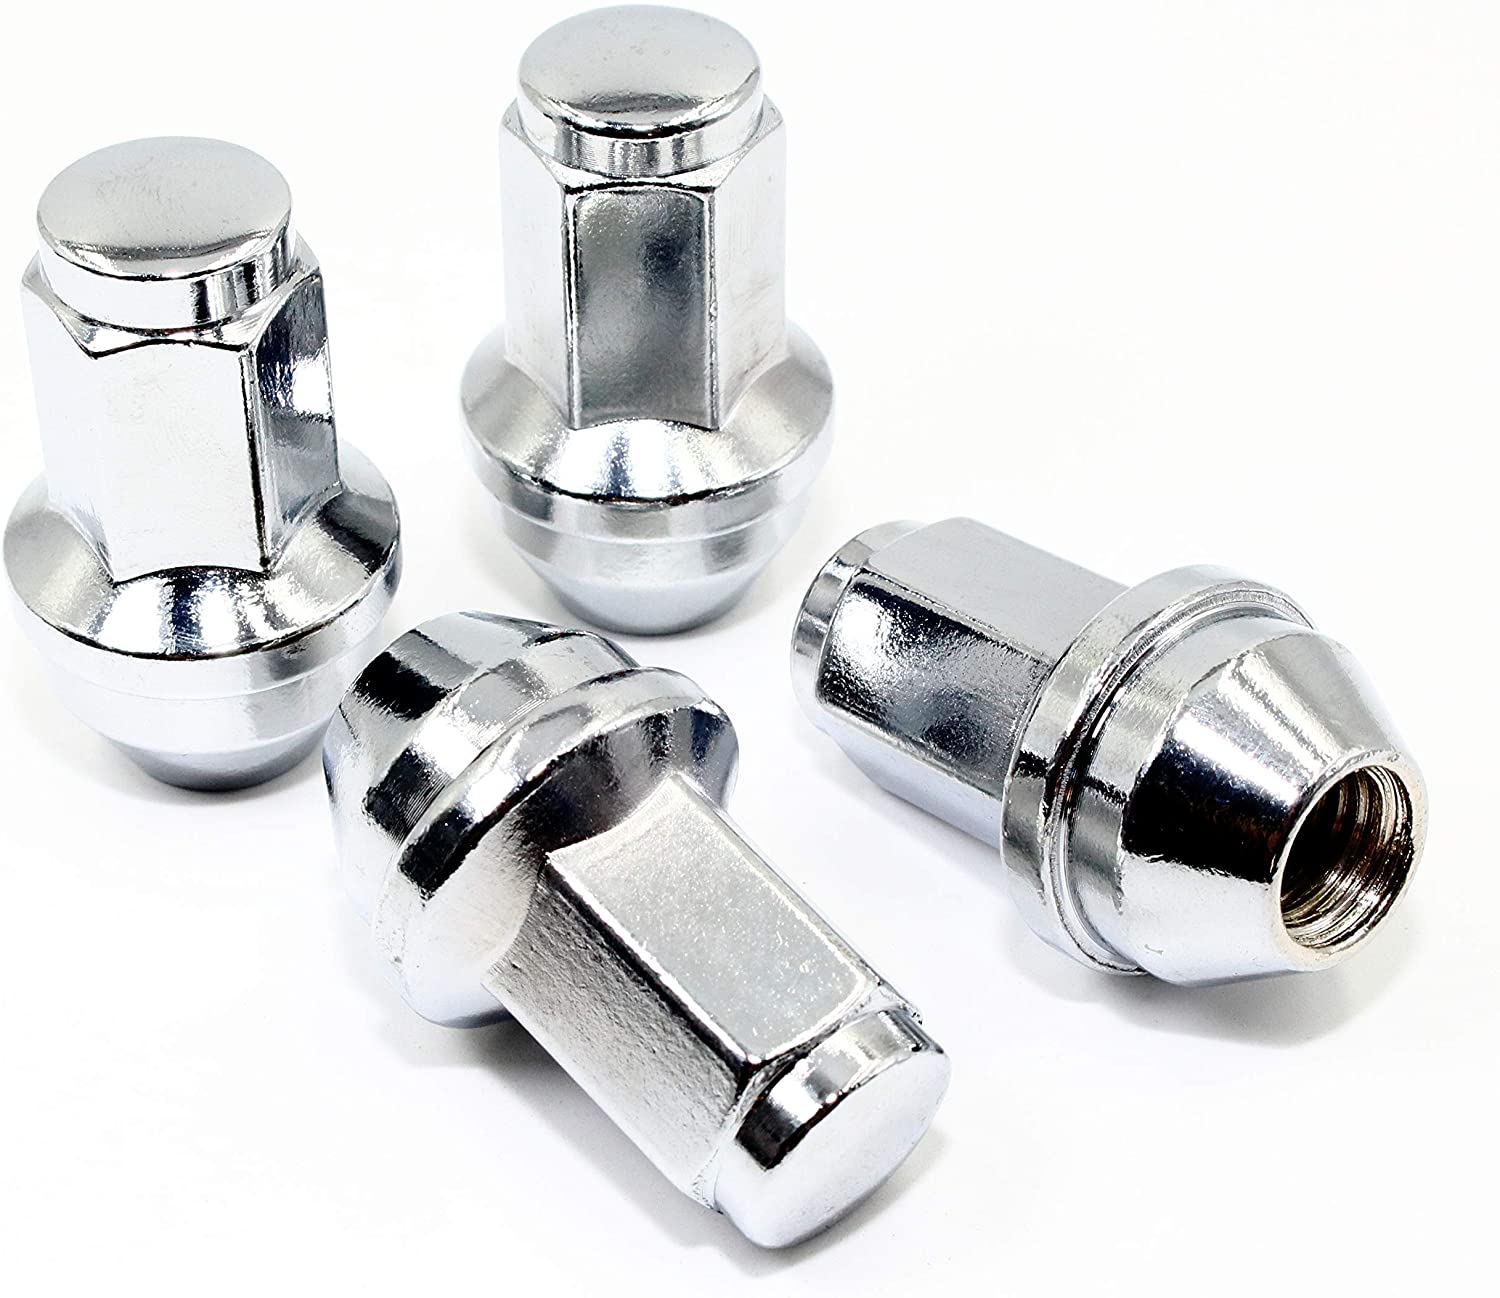 20 1/2" 1.6" 3/4 19mm Hex Chrome Acorn Factory Style Lug Nuts for Ford Lincoln 